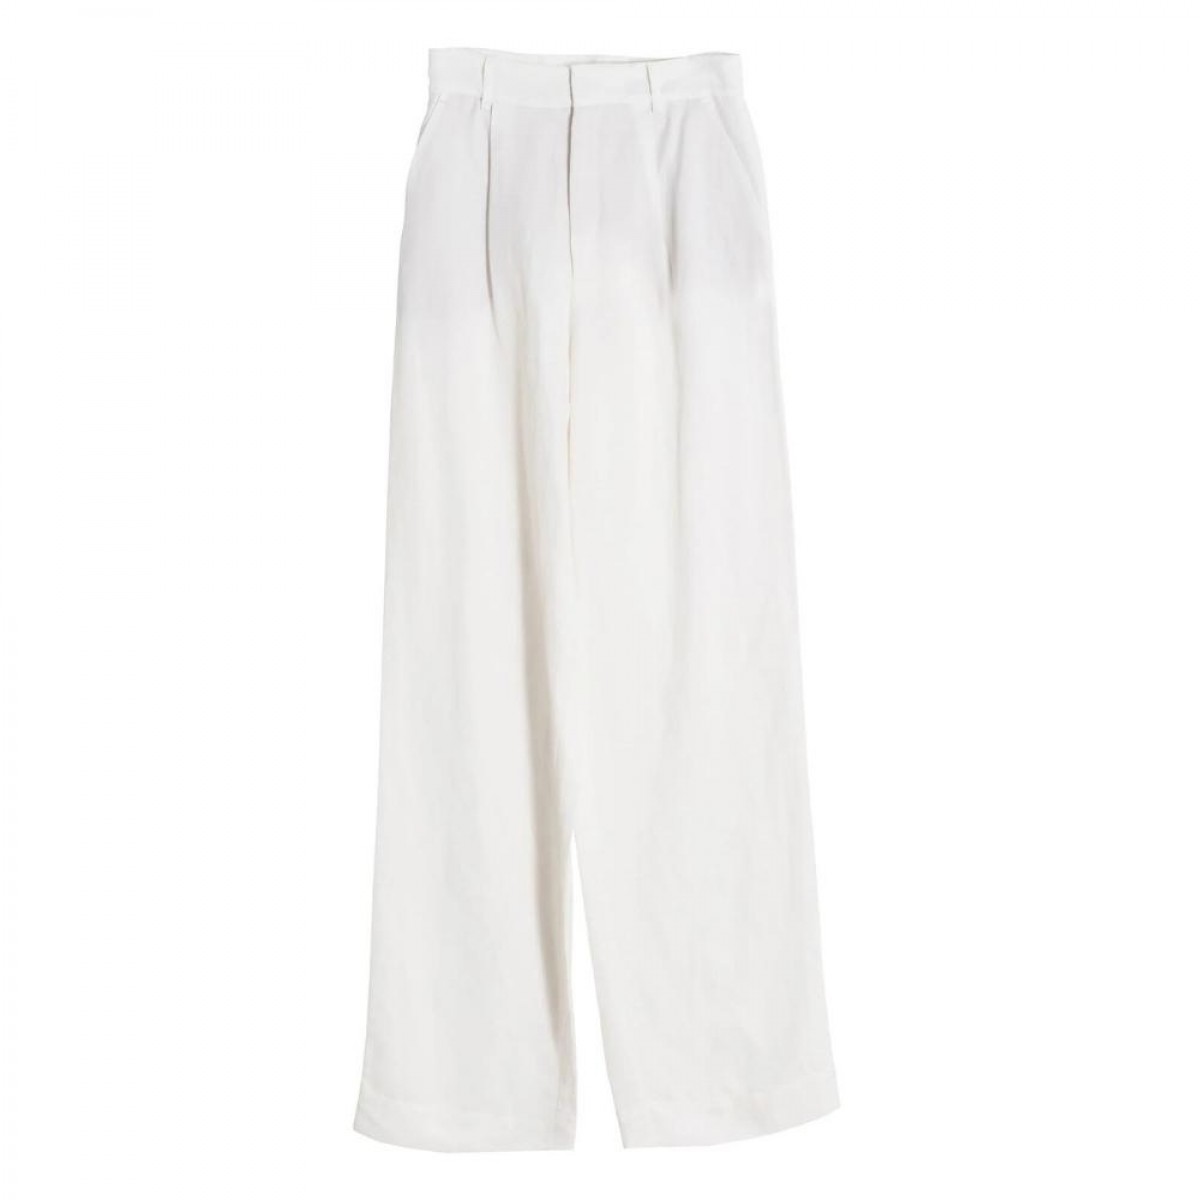 noma linen trousers - off white - front